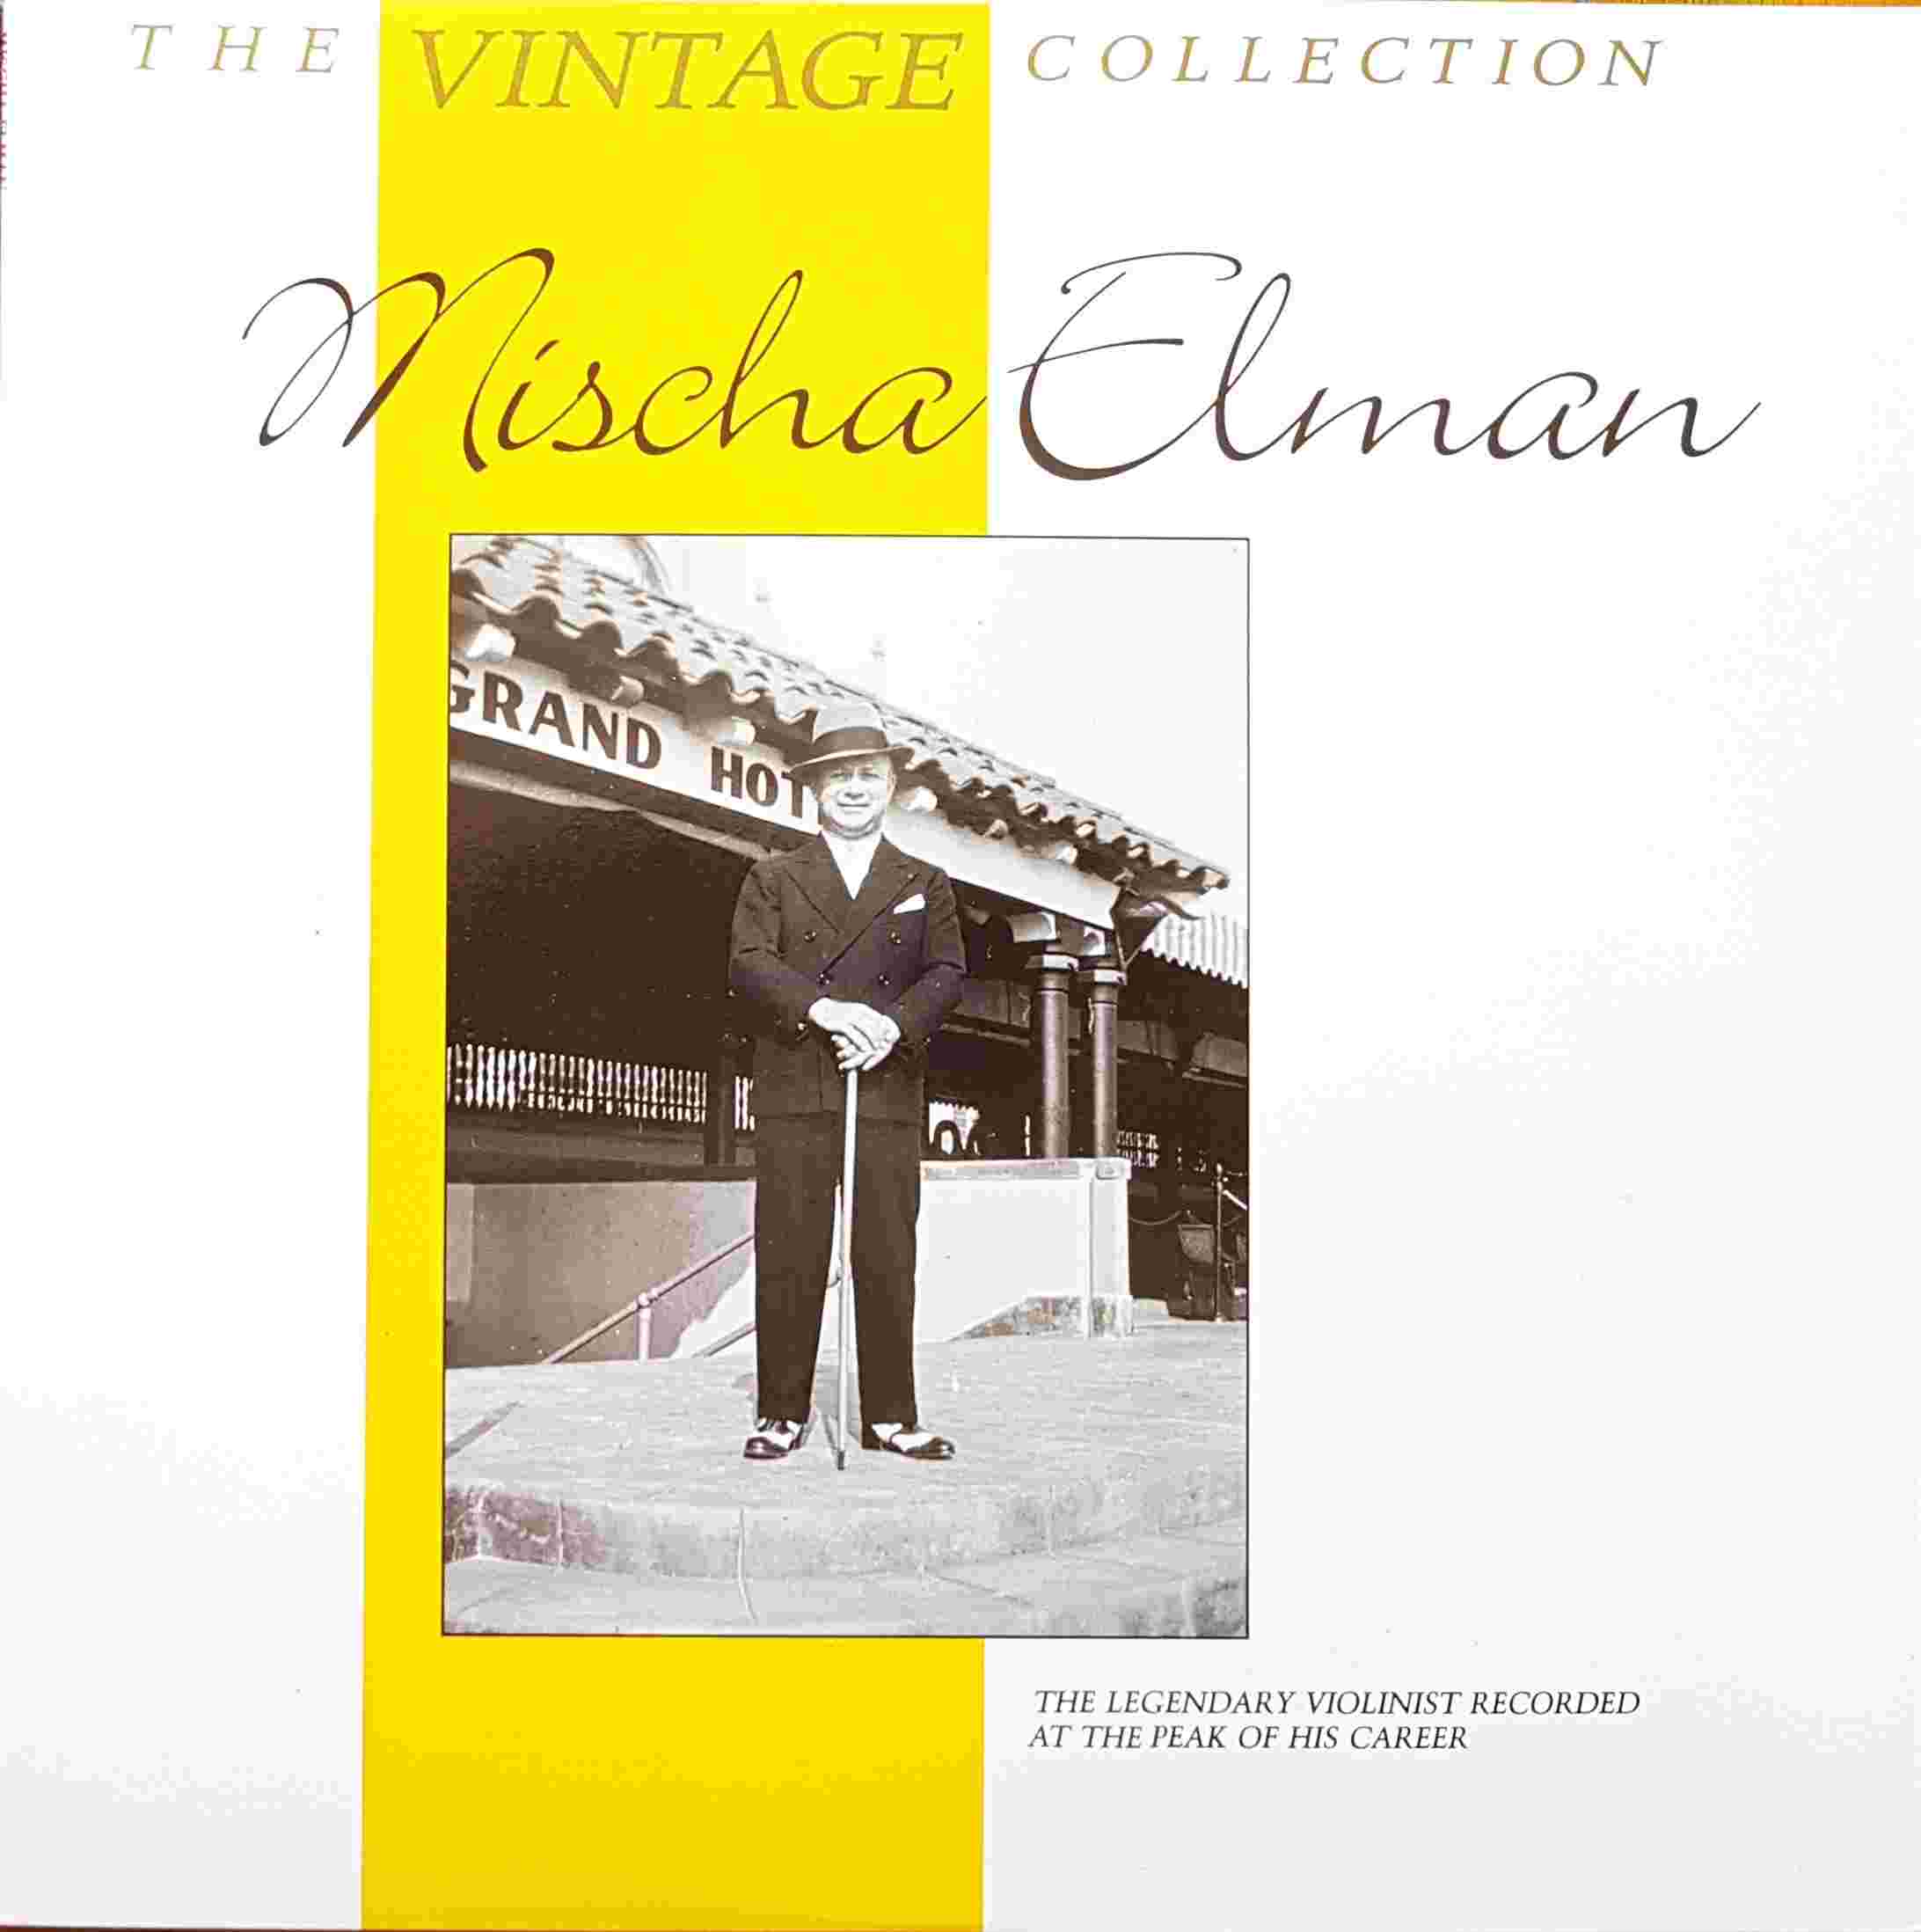 Picture of REH 717 The vintage collection - Mischa Elman by artist Tchaikovsky / Beethoven / Mischa Elman with orchestra